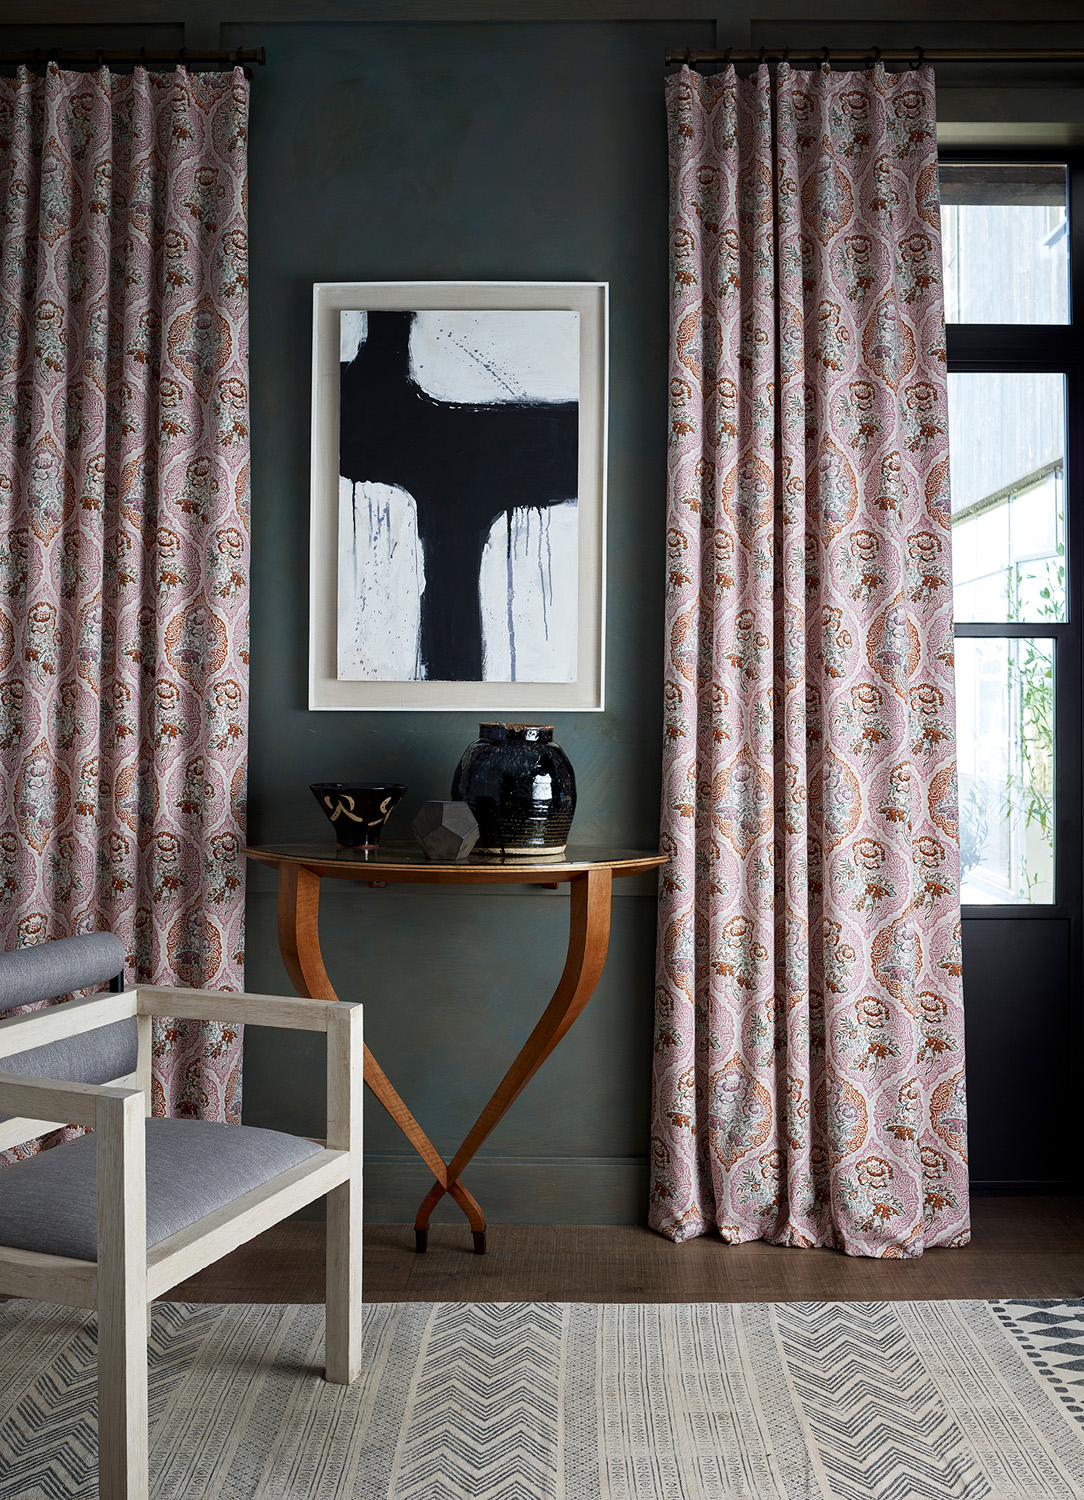 Curtains by Rapture & Wright - traditional British furniture and interior design